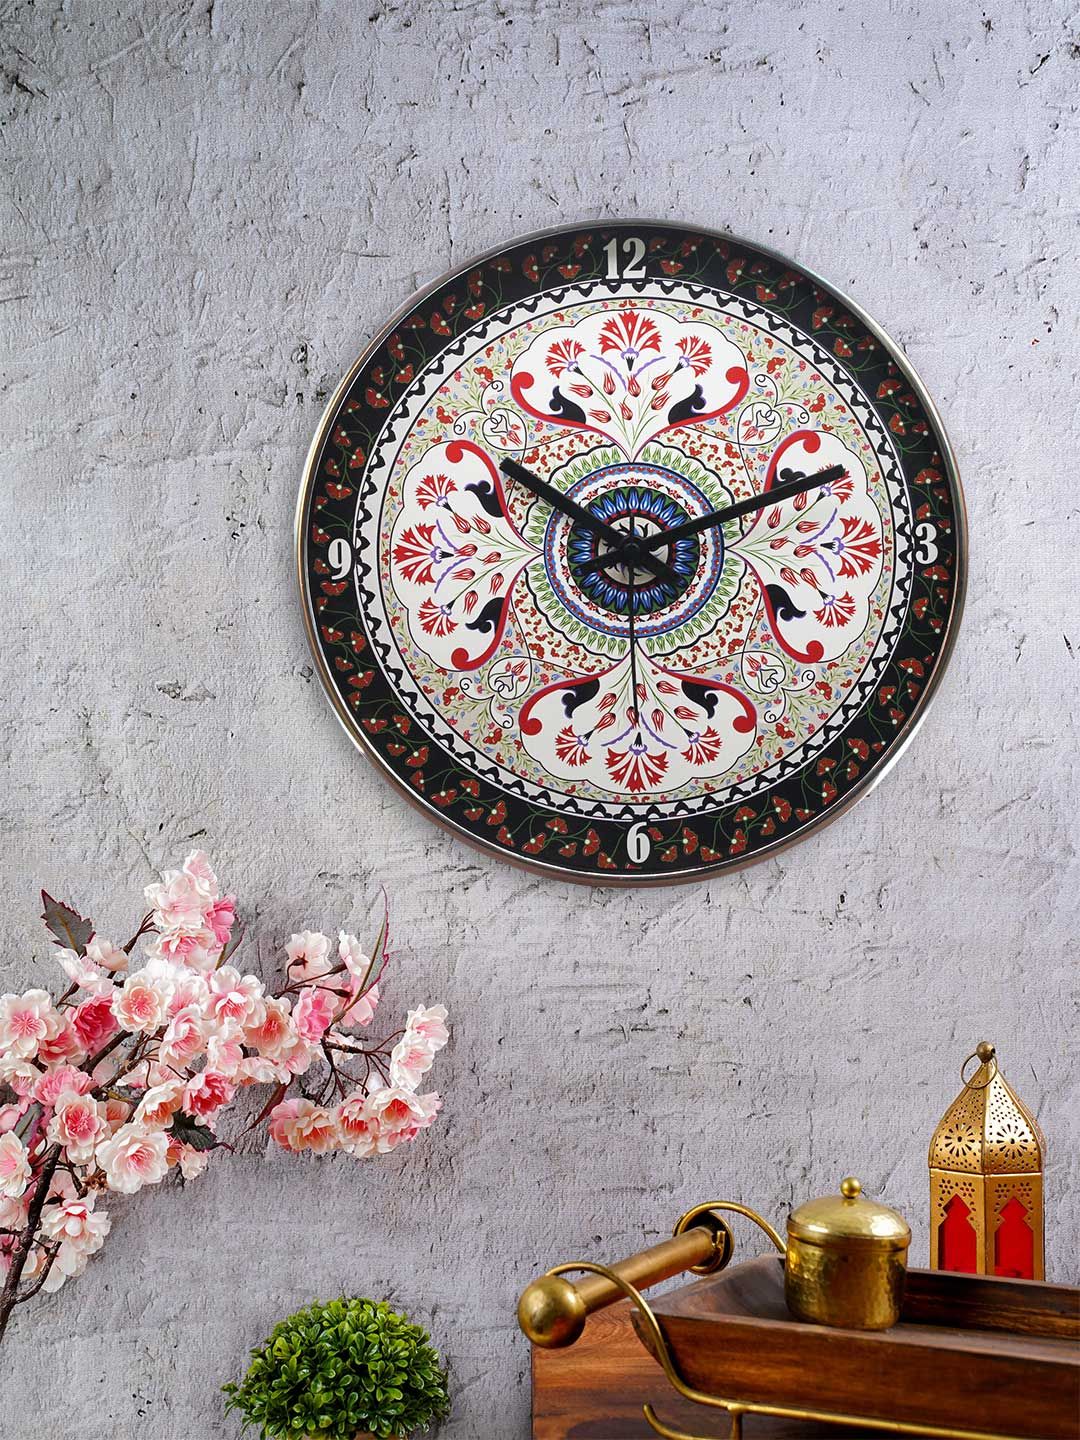 KOLOROBIA White & Maroon Round Turkish Fervor Printed 30.4 cm Analogue Wall Clock Price in India